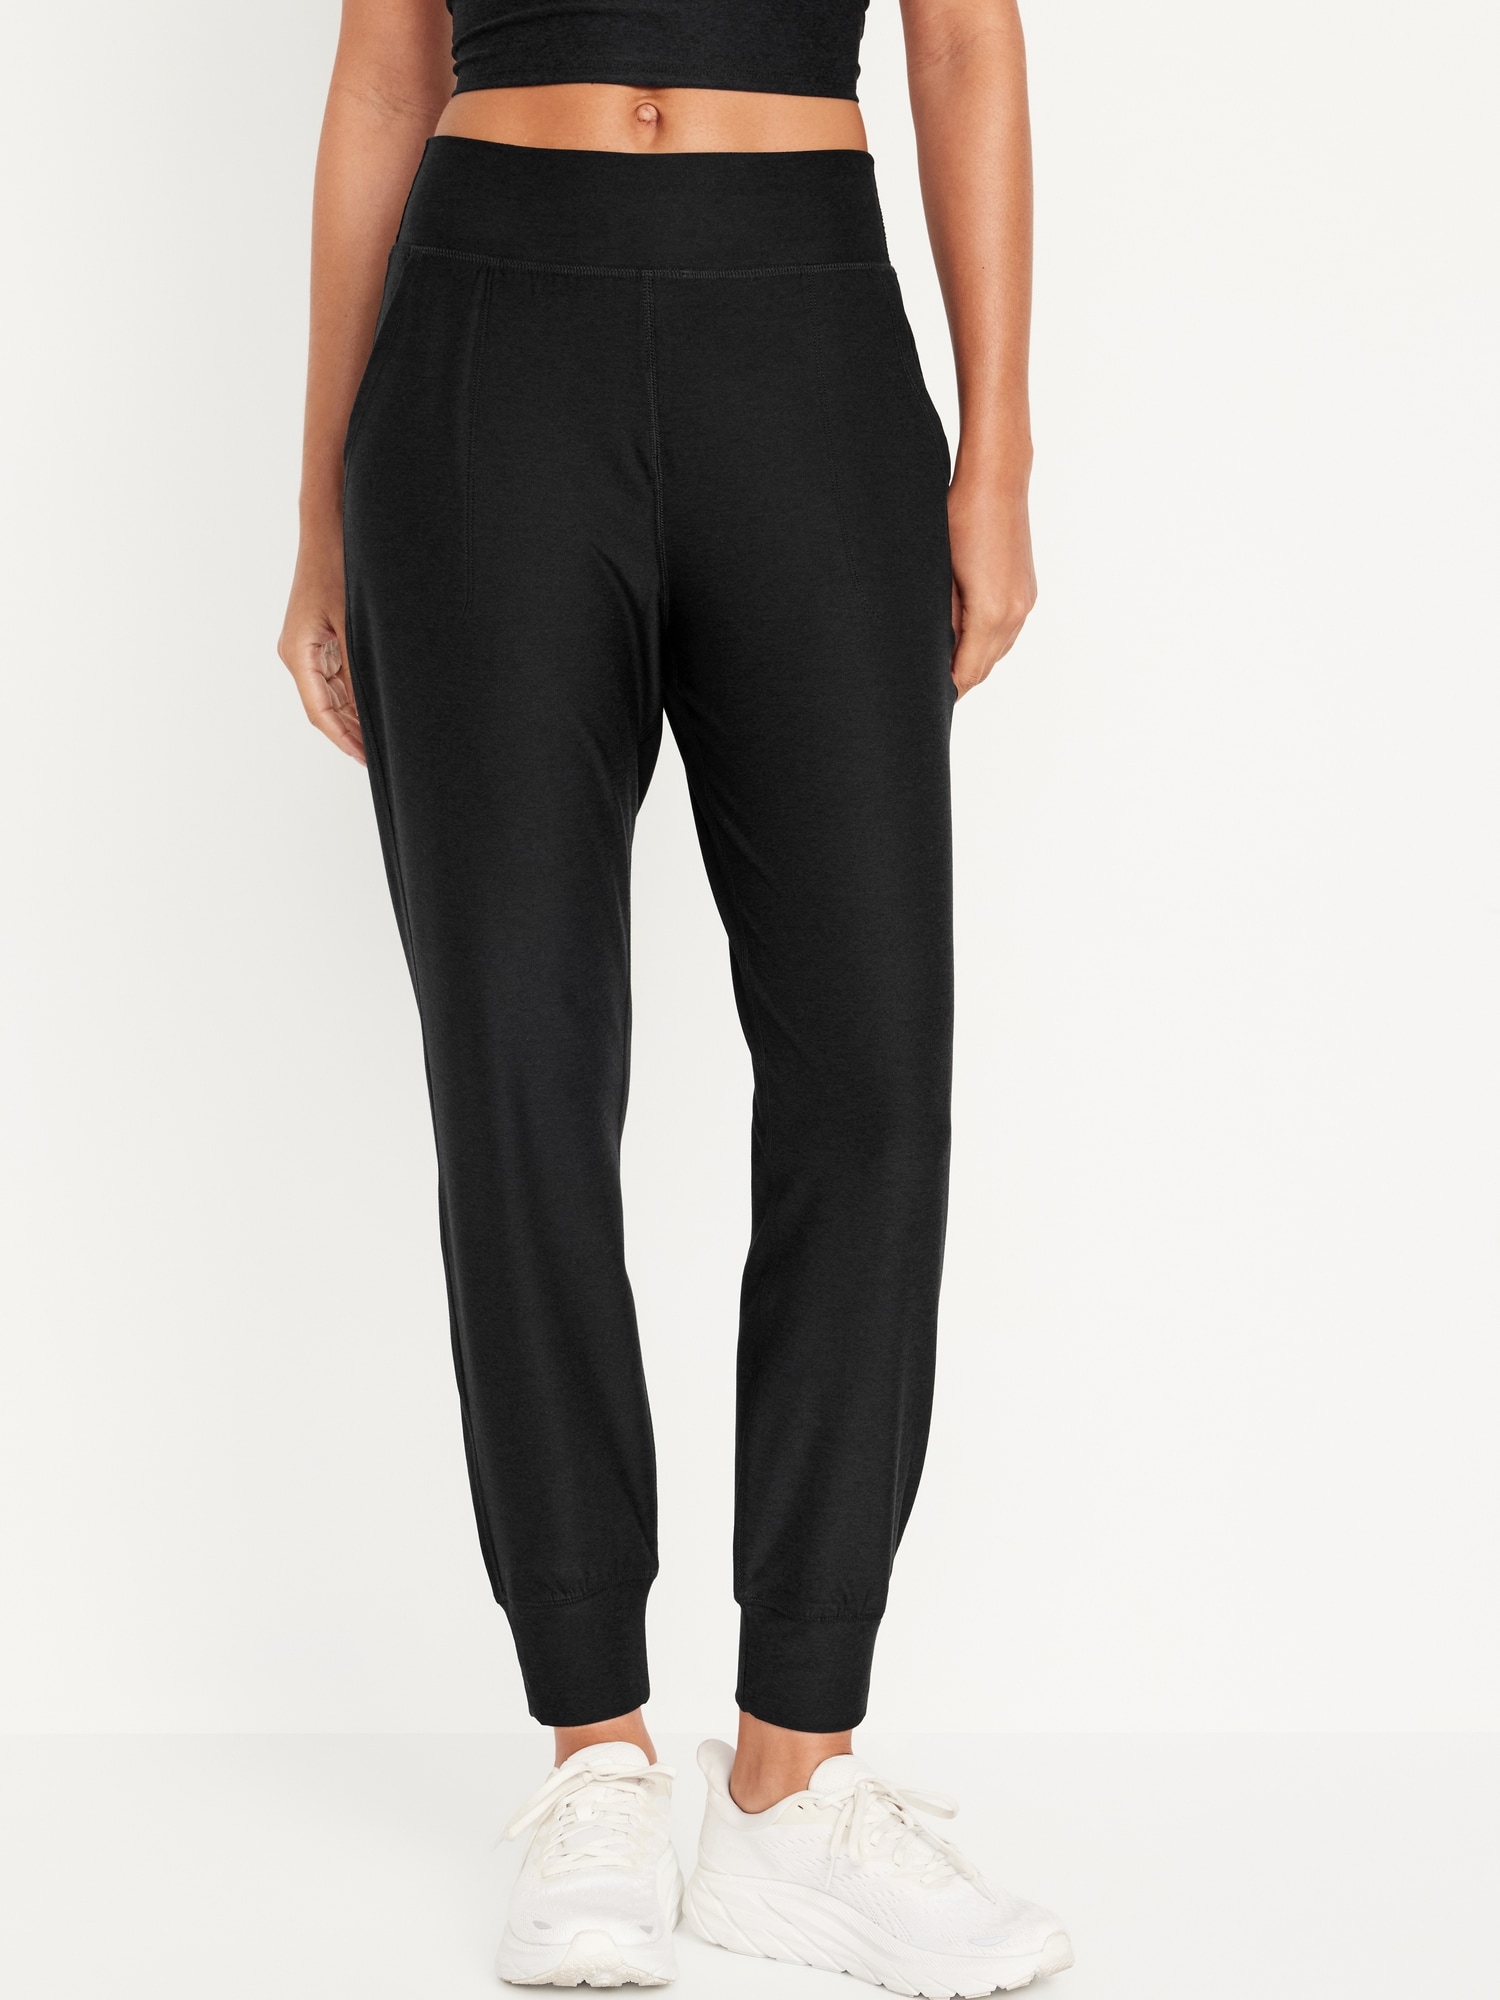 Old Navy Women's High Rise Cloud Joggers